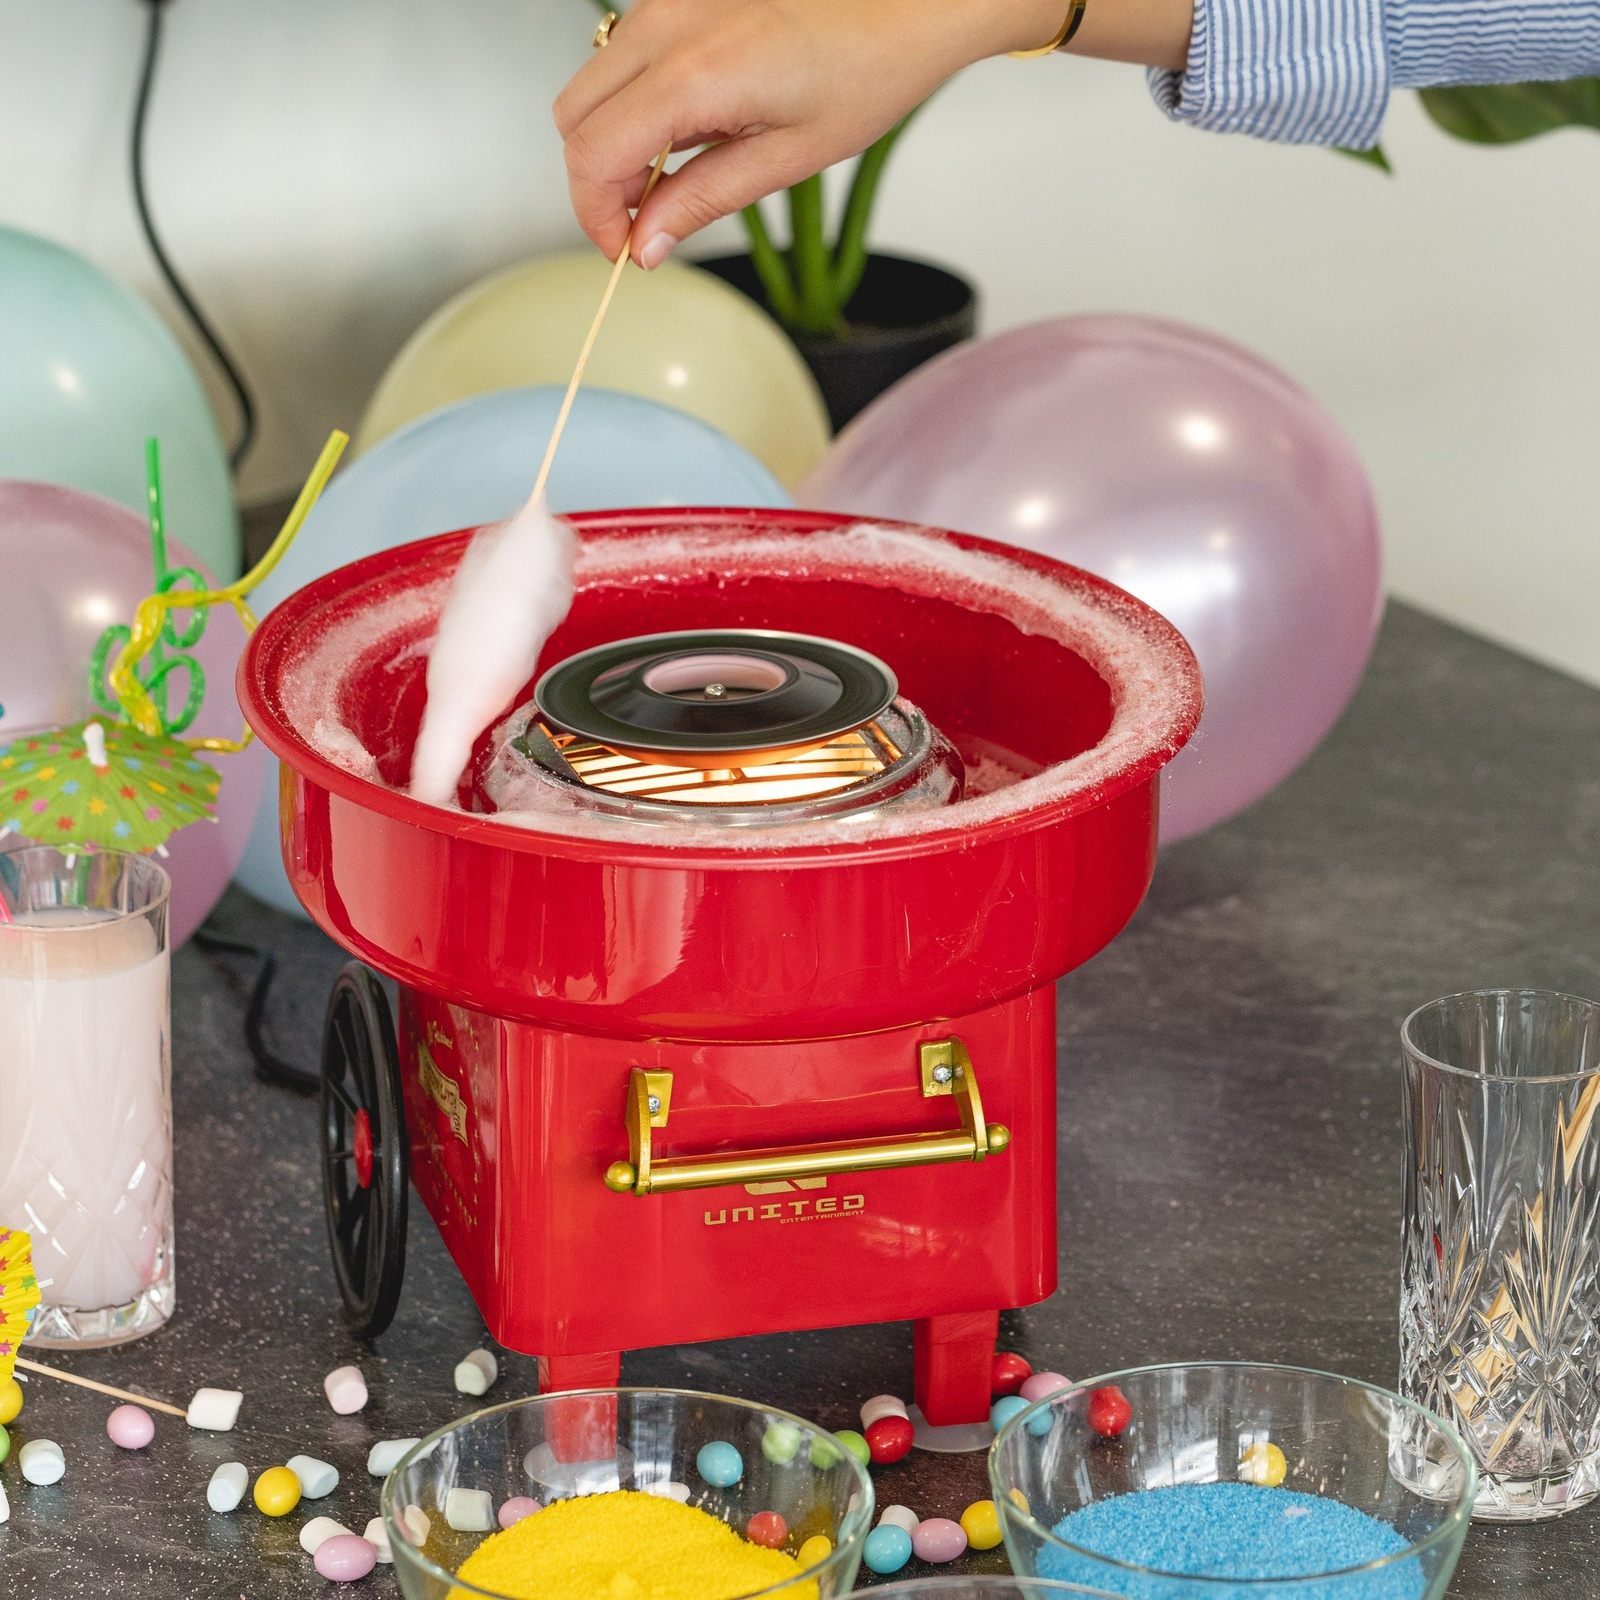 United Entertainment Cotton Candy Suikerspin Maker